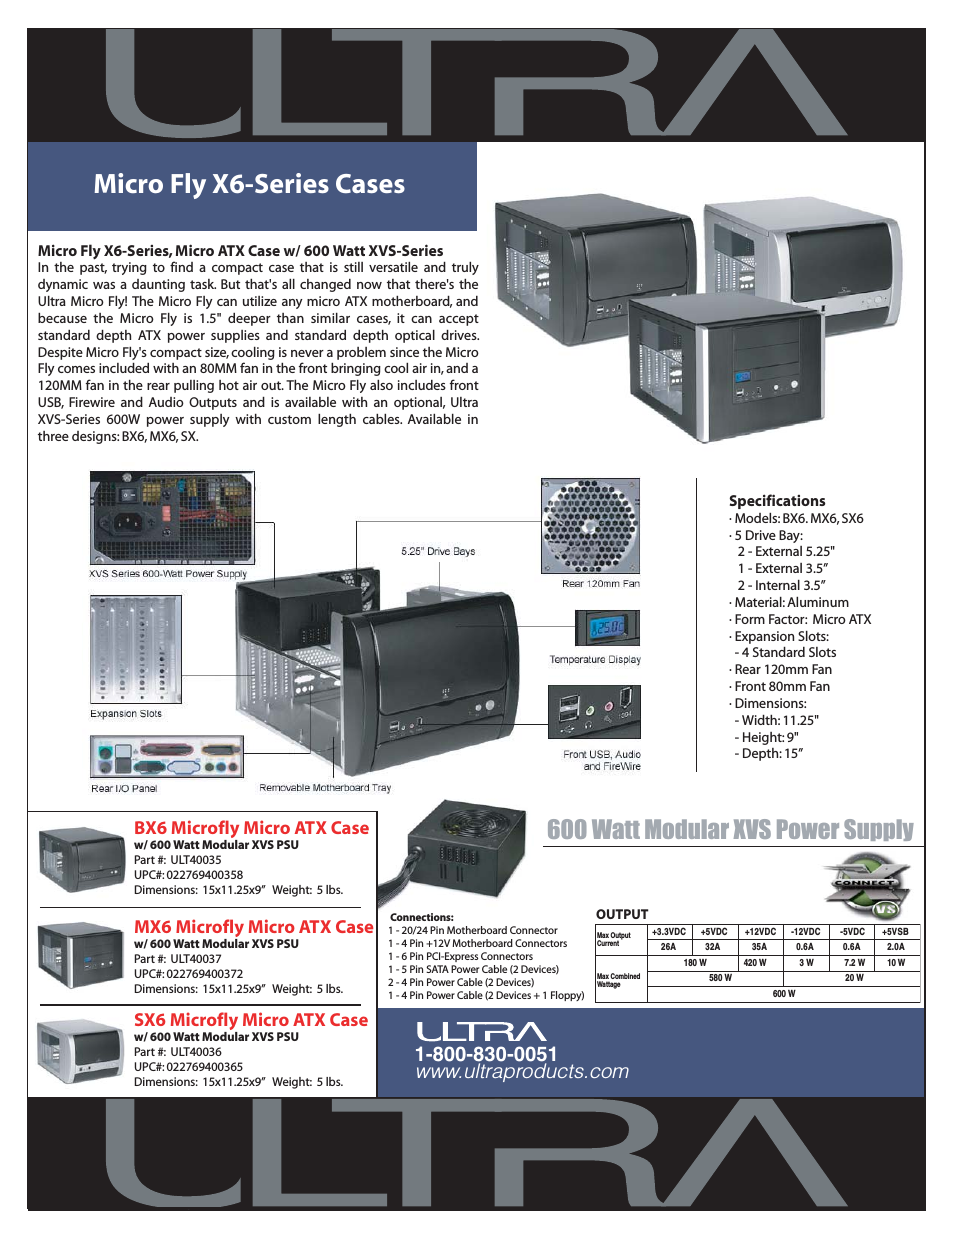 Micro Fly X6-Series Cases SX6